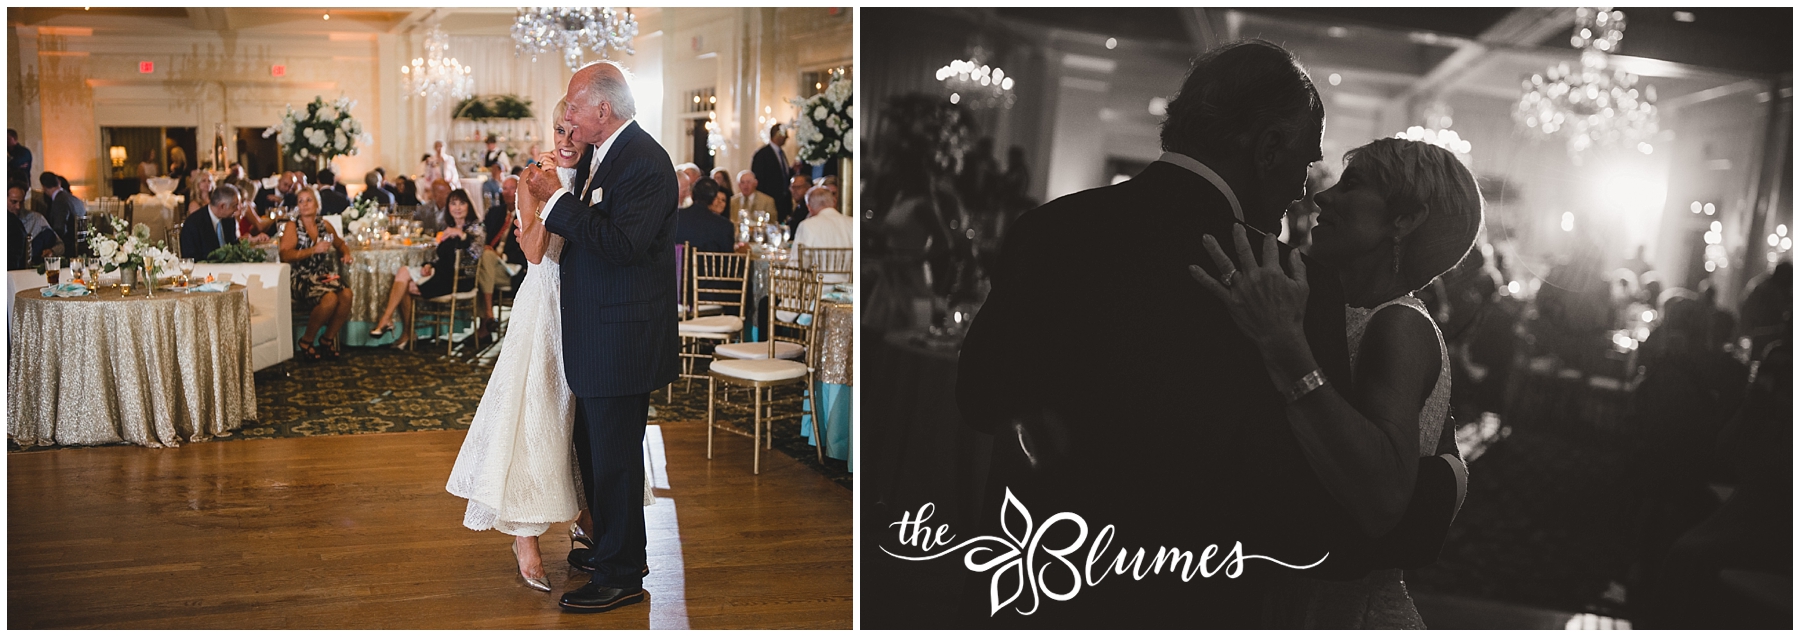 Athens Country Club,Athens GA,birthday,corporate event,event photography,family reunion,